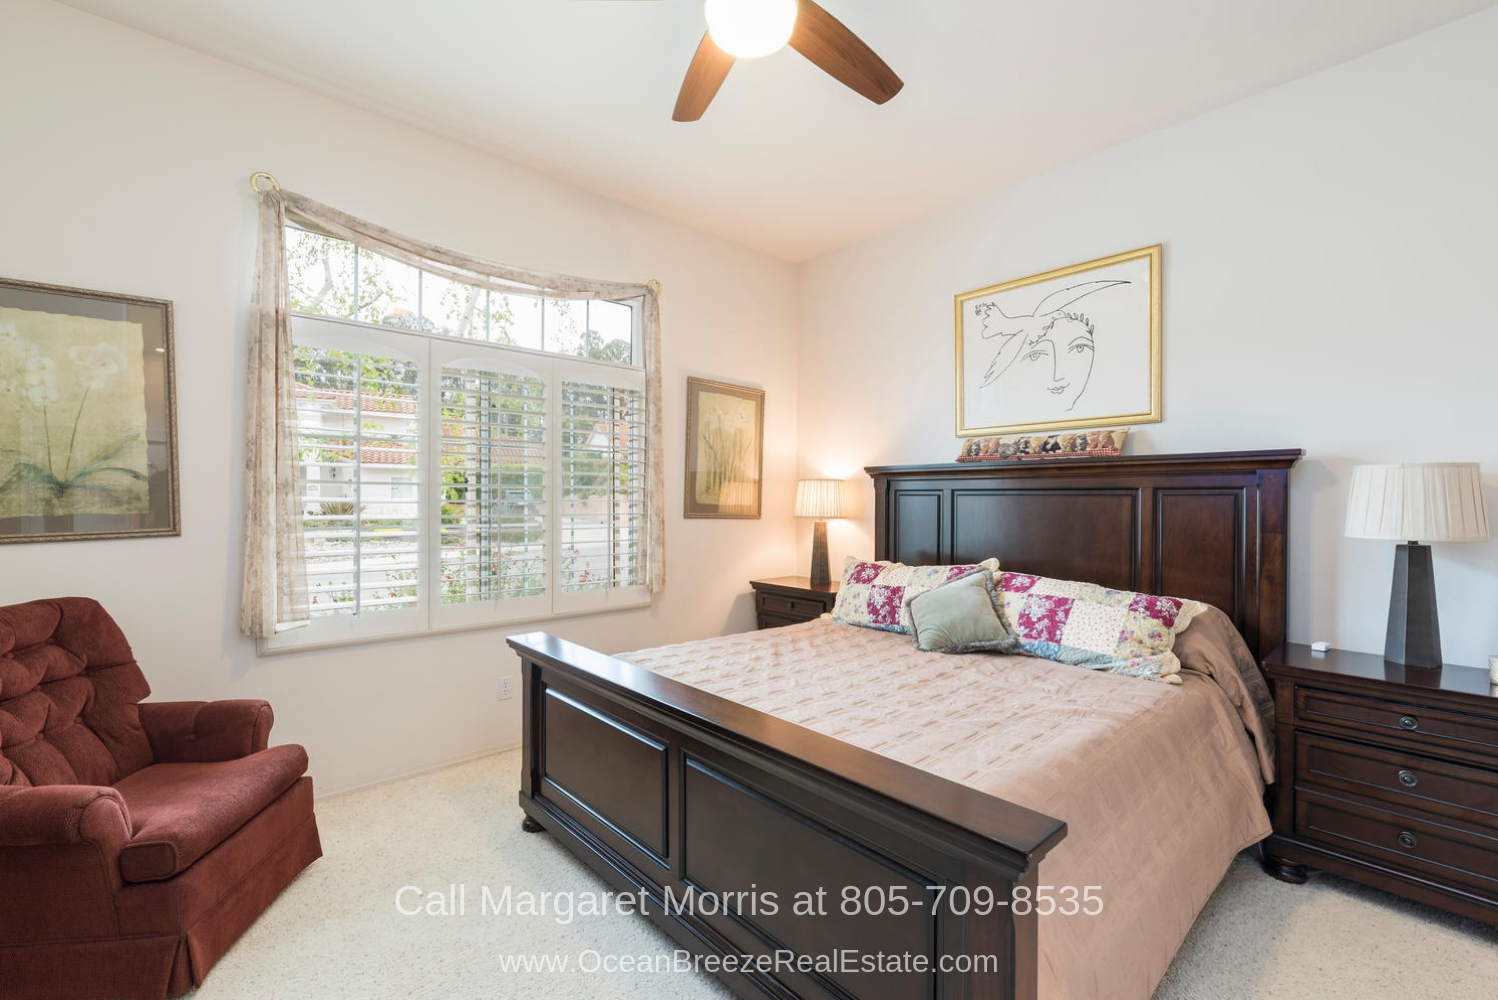 Golf Homes for Sale in The Fairways Nipomo CA -The master bedroom of this golf home in Blacklake Nipomo is large and radiates a cozy appeal.